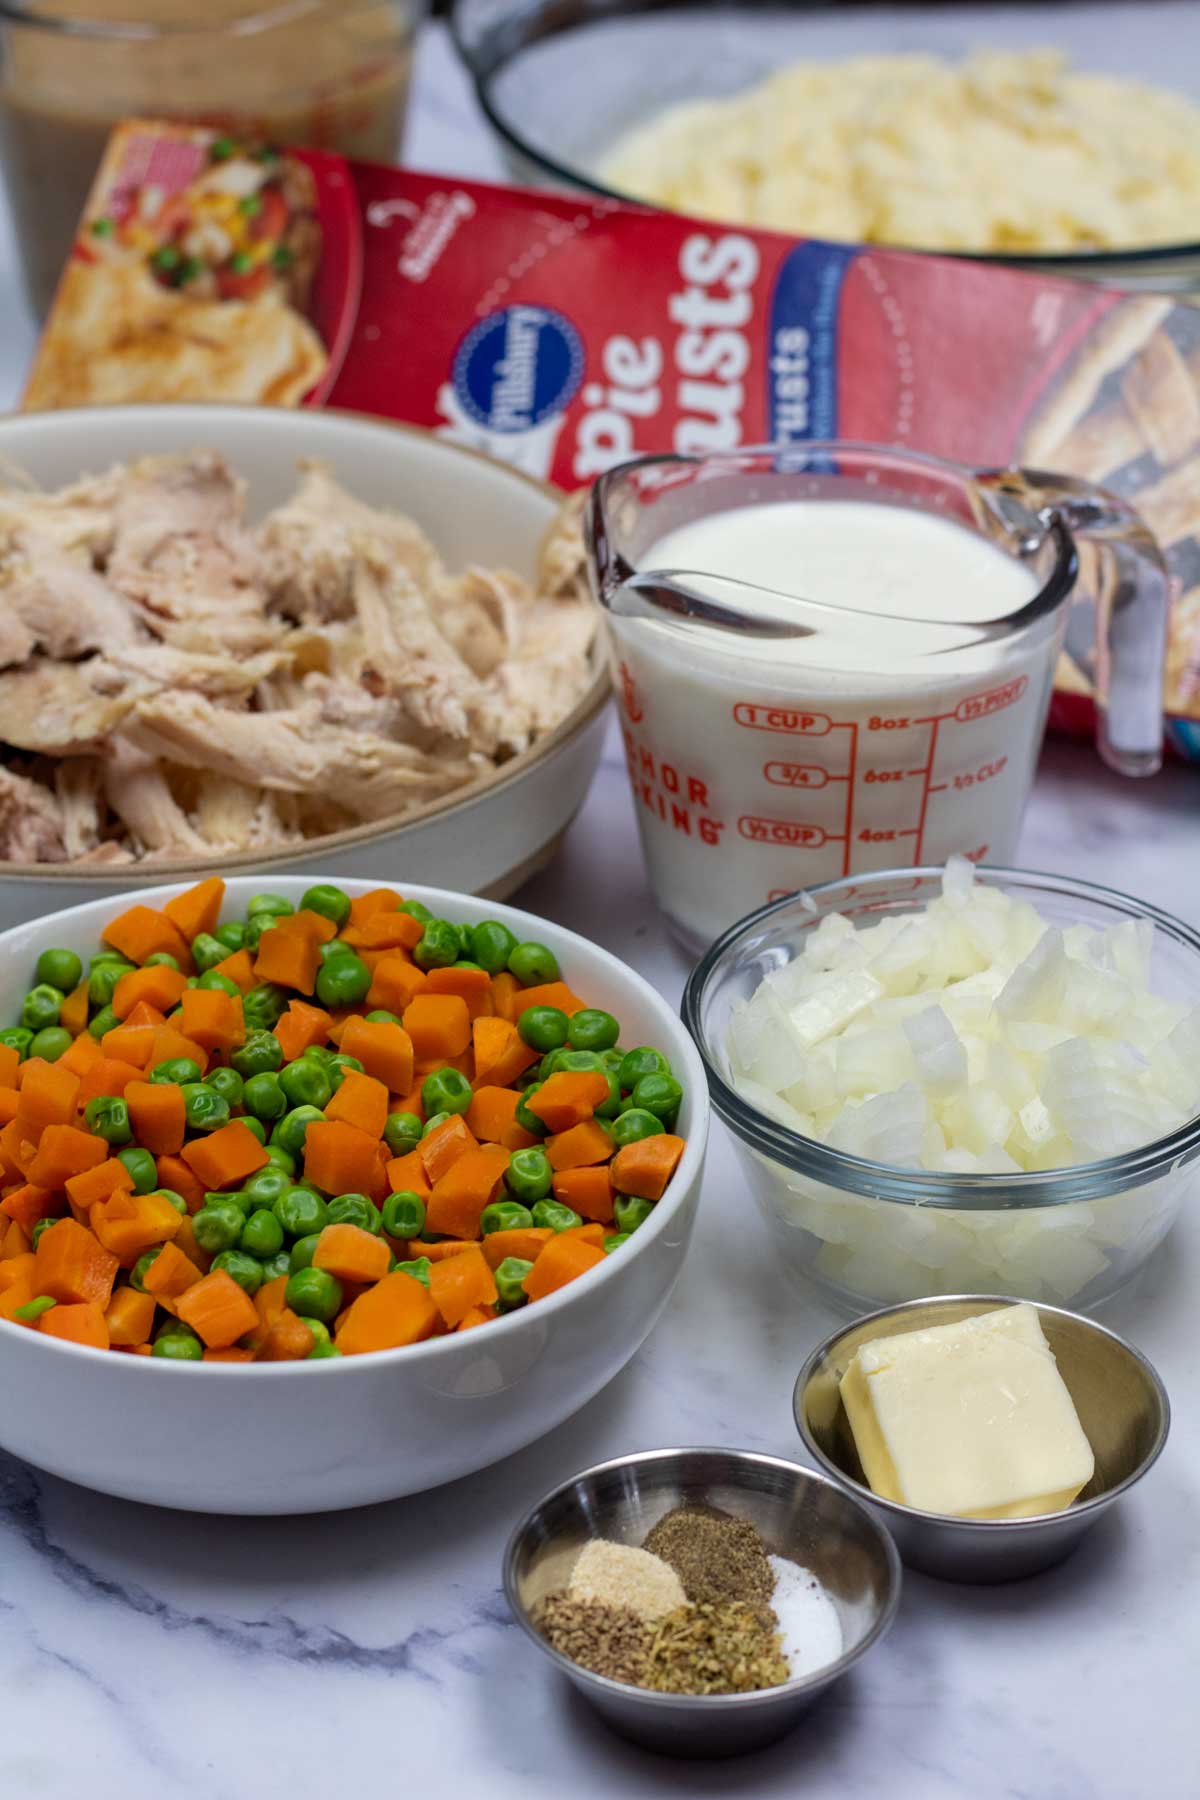 Tall image showing leftover turkey pot pie ingredients.